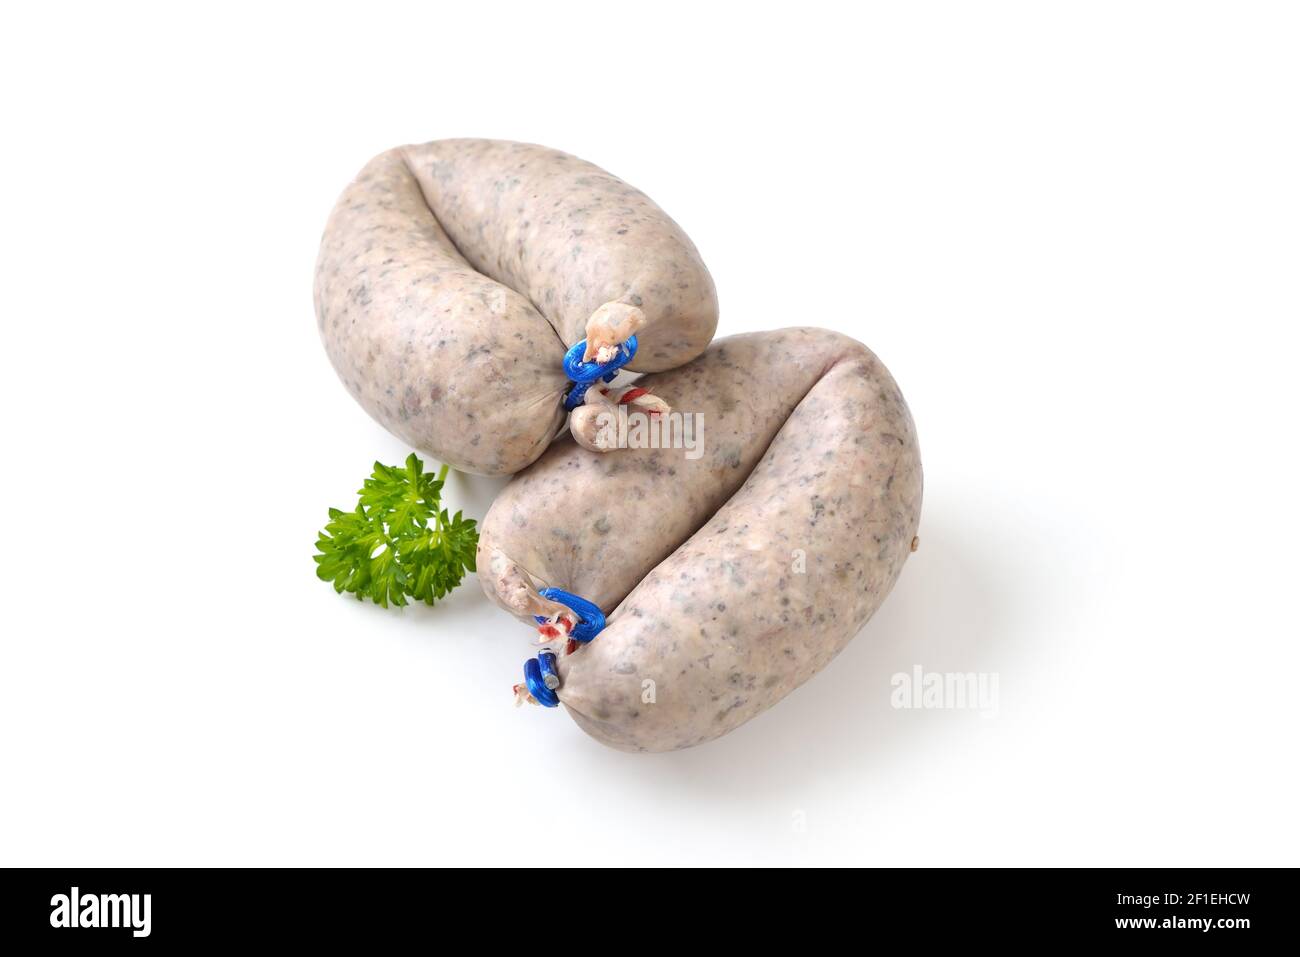 Two fresh Bavarian liver sausages, such as those used for hearty German meat platters, on white background Stock Photo